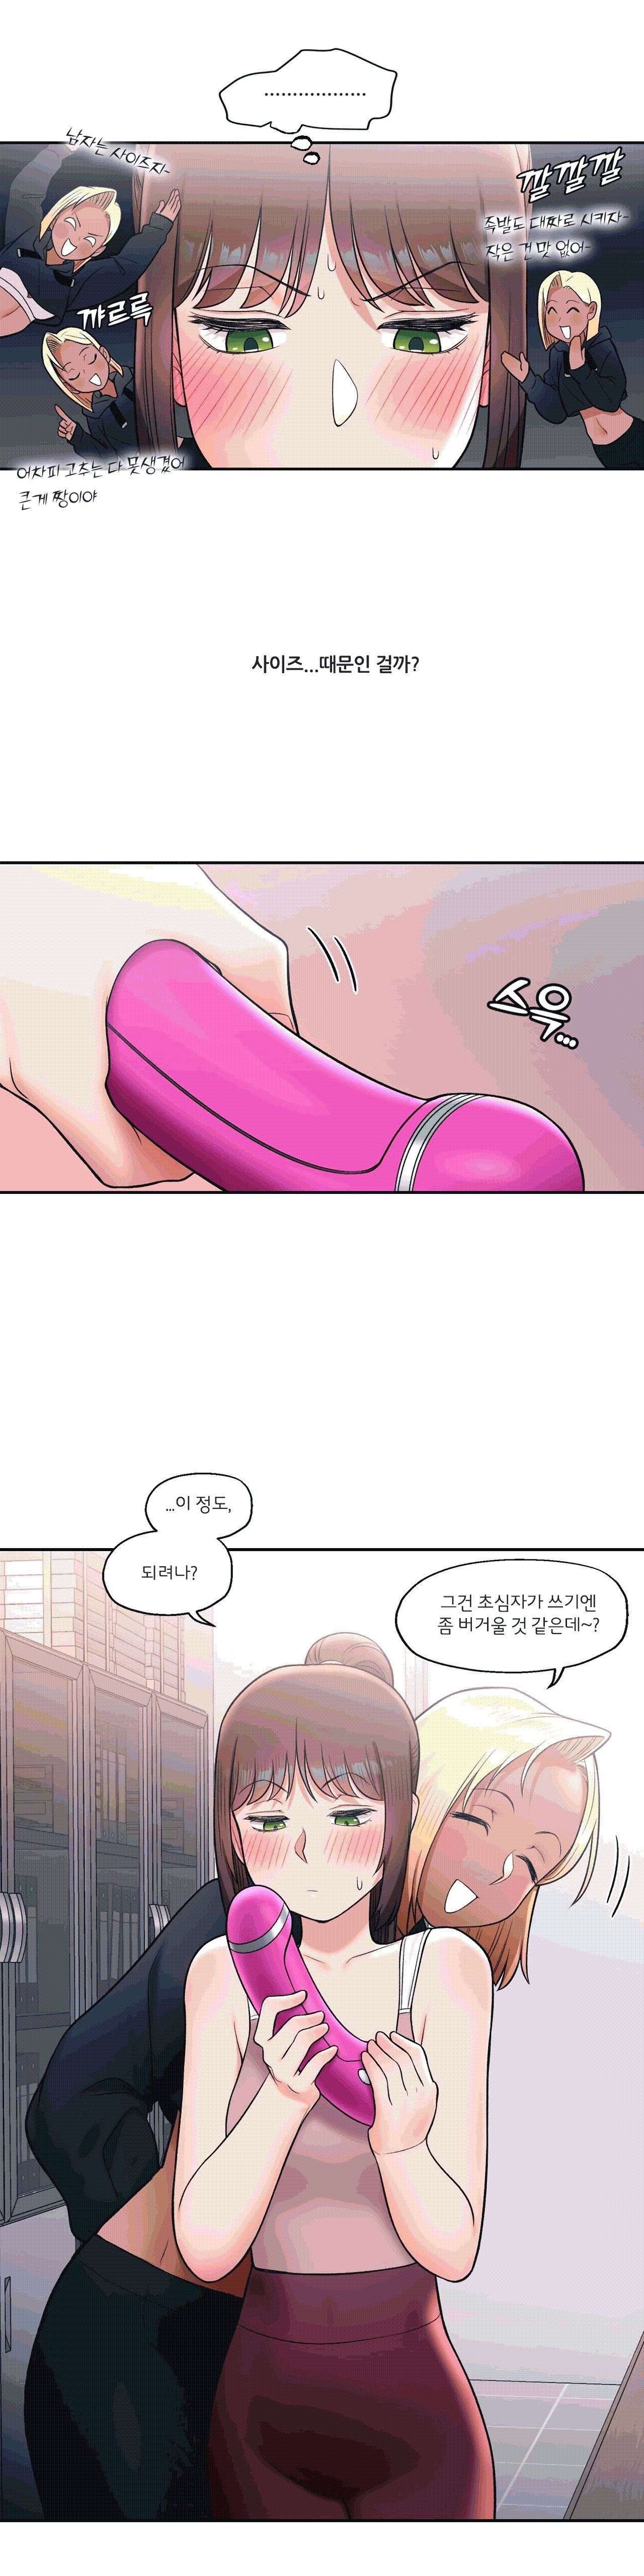 Sexercise Raw - Chapter 30 Page 2